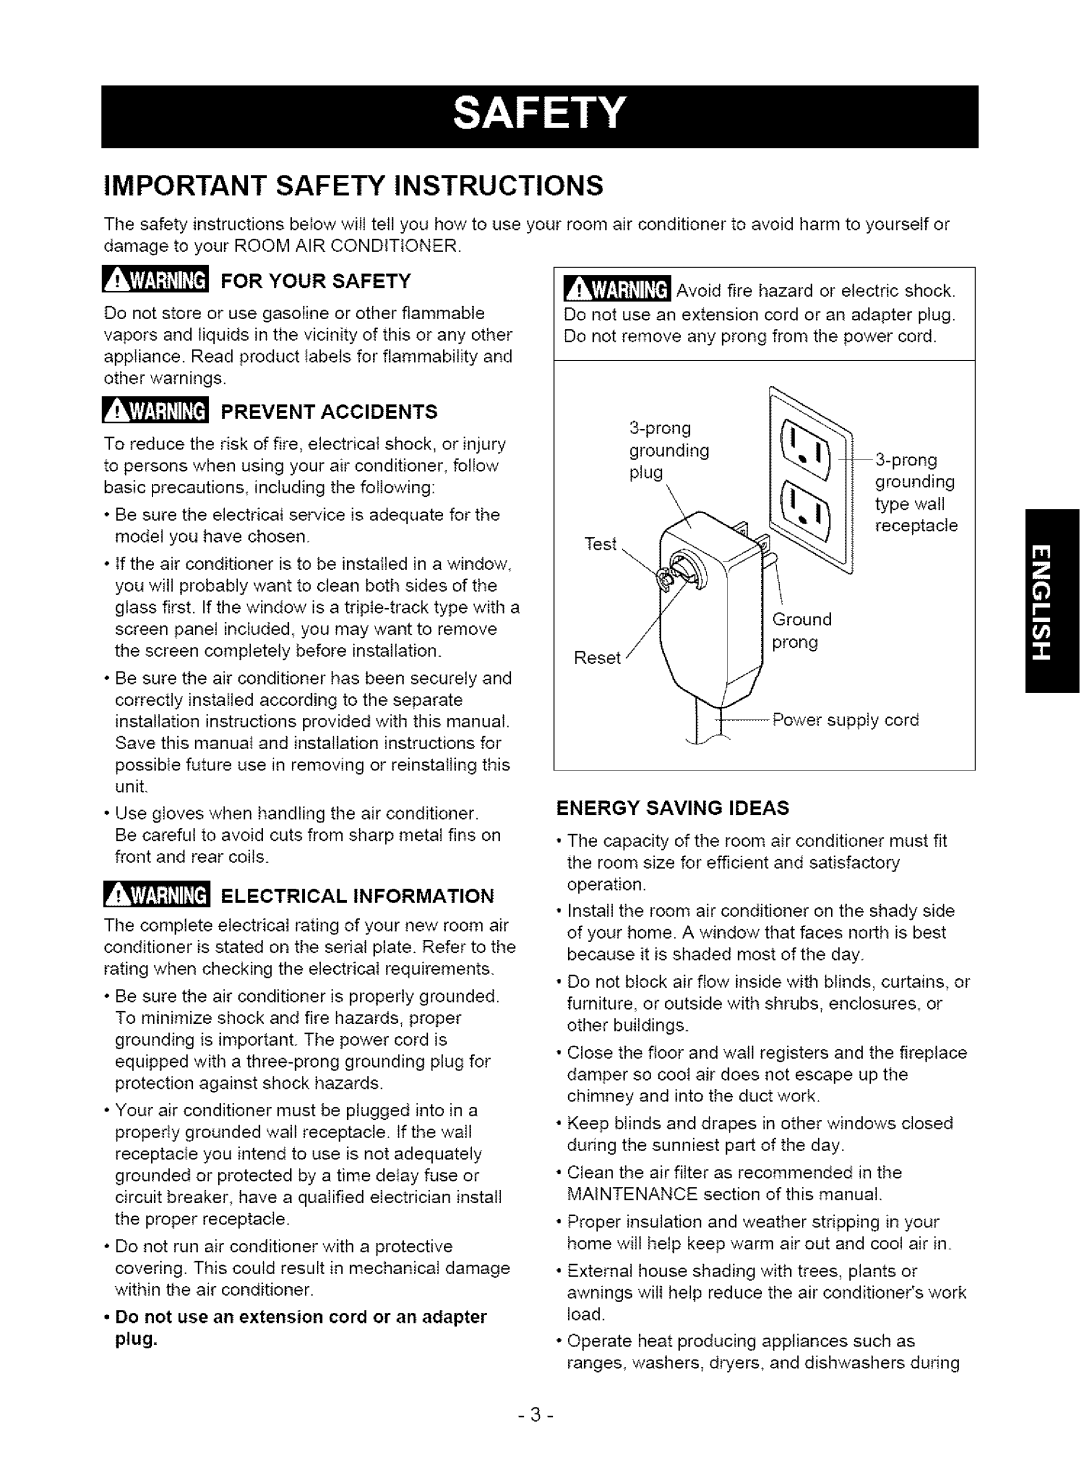 Kenmore 580.75123 Important Safety Instructions, Energy Saving Ideas, For Your Safety, Prevent Accidents, tpply cord 